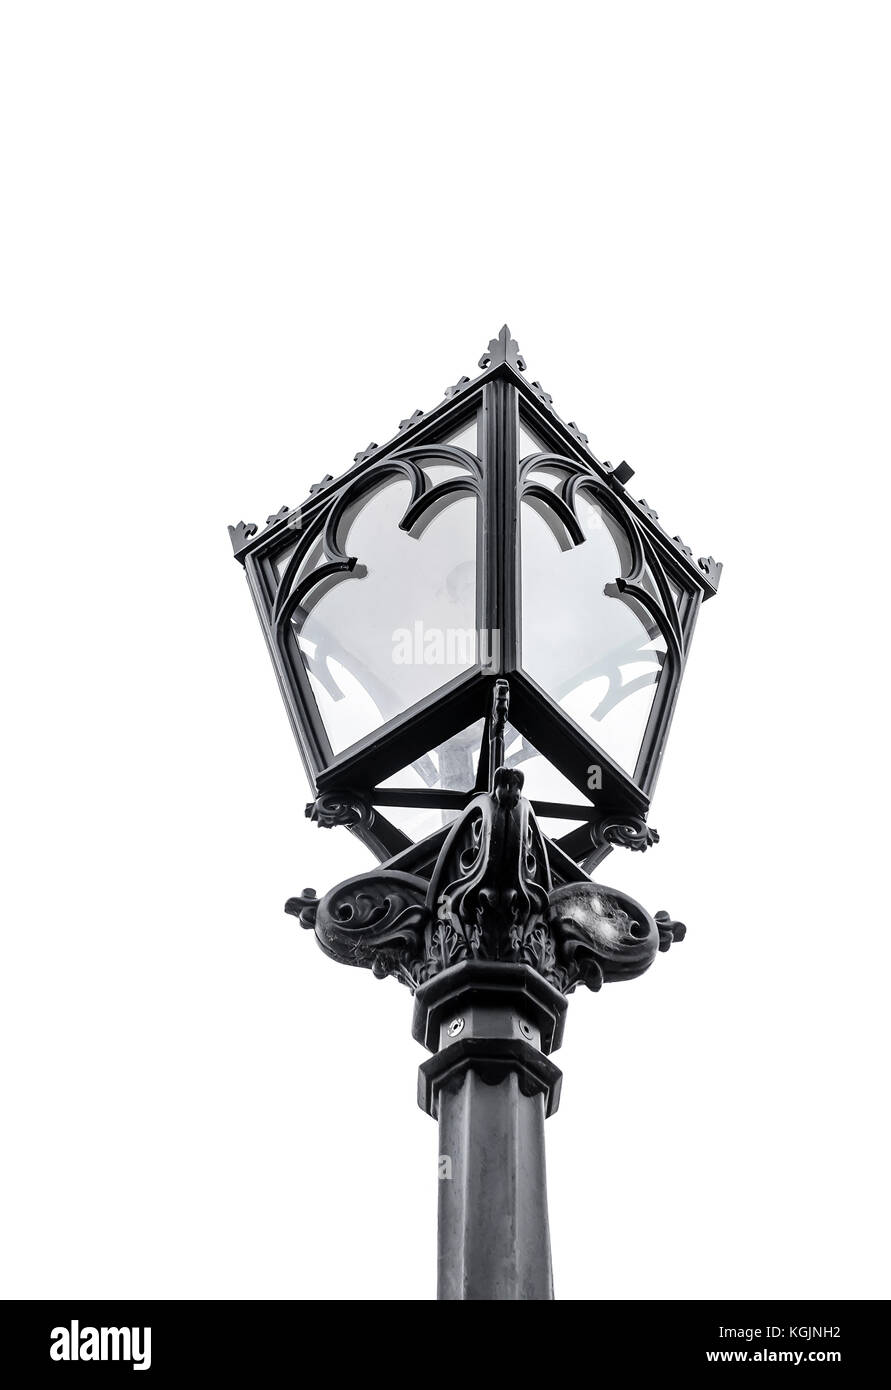 Street lamp on a white background. Stock Photo